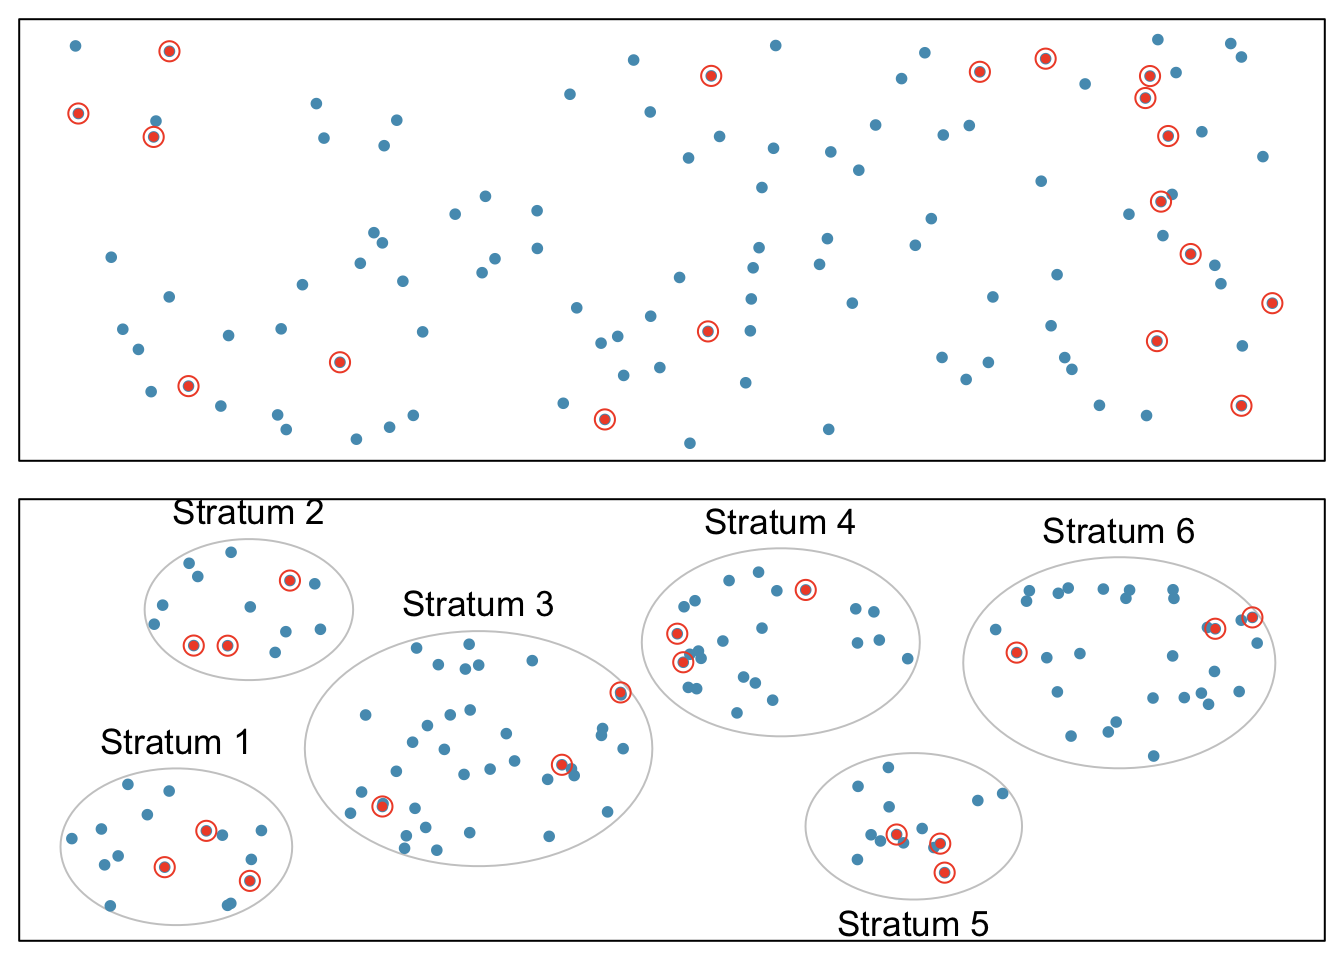 Examples of simple random and stratified sampling. In the top panel, simple random sampling is used to randomly select 18 cases (circled orange dots) out of the total population (all dots). The bottom panel illustrates stratified sampling: cases are grouped into six strata, then simple random sampling is employed within each stratum.